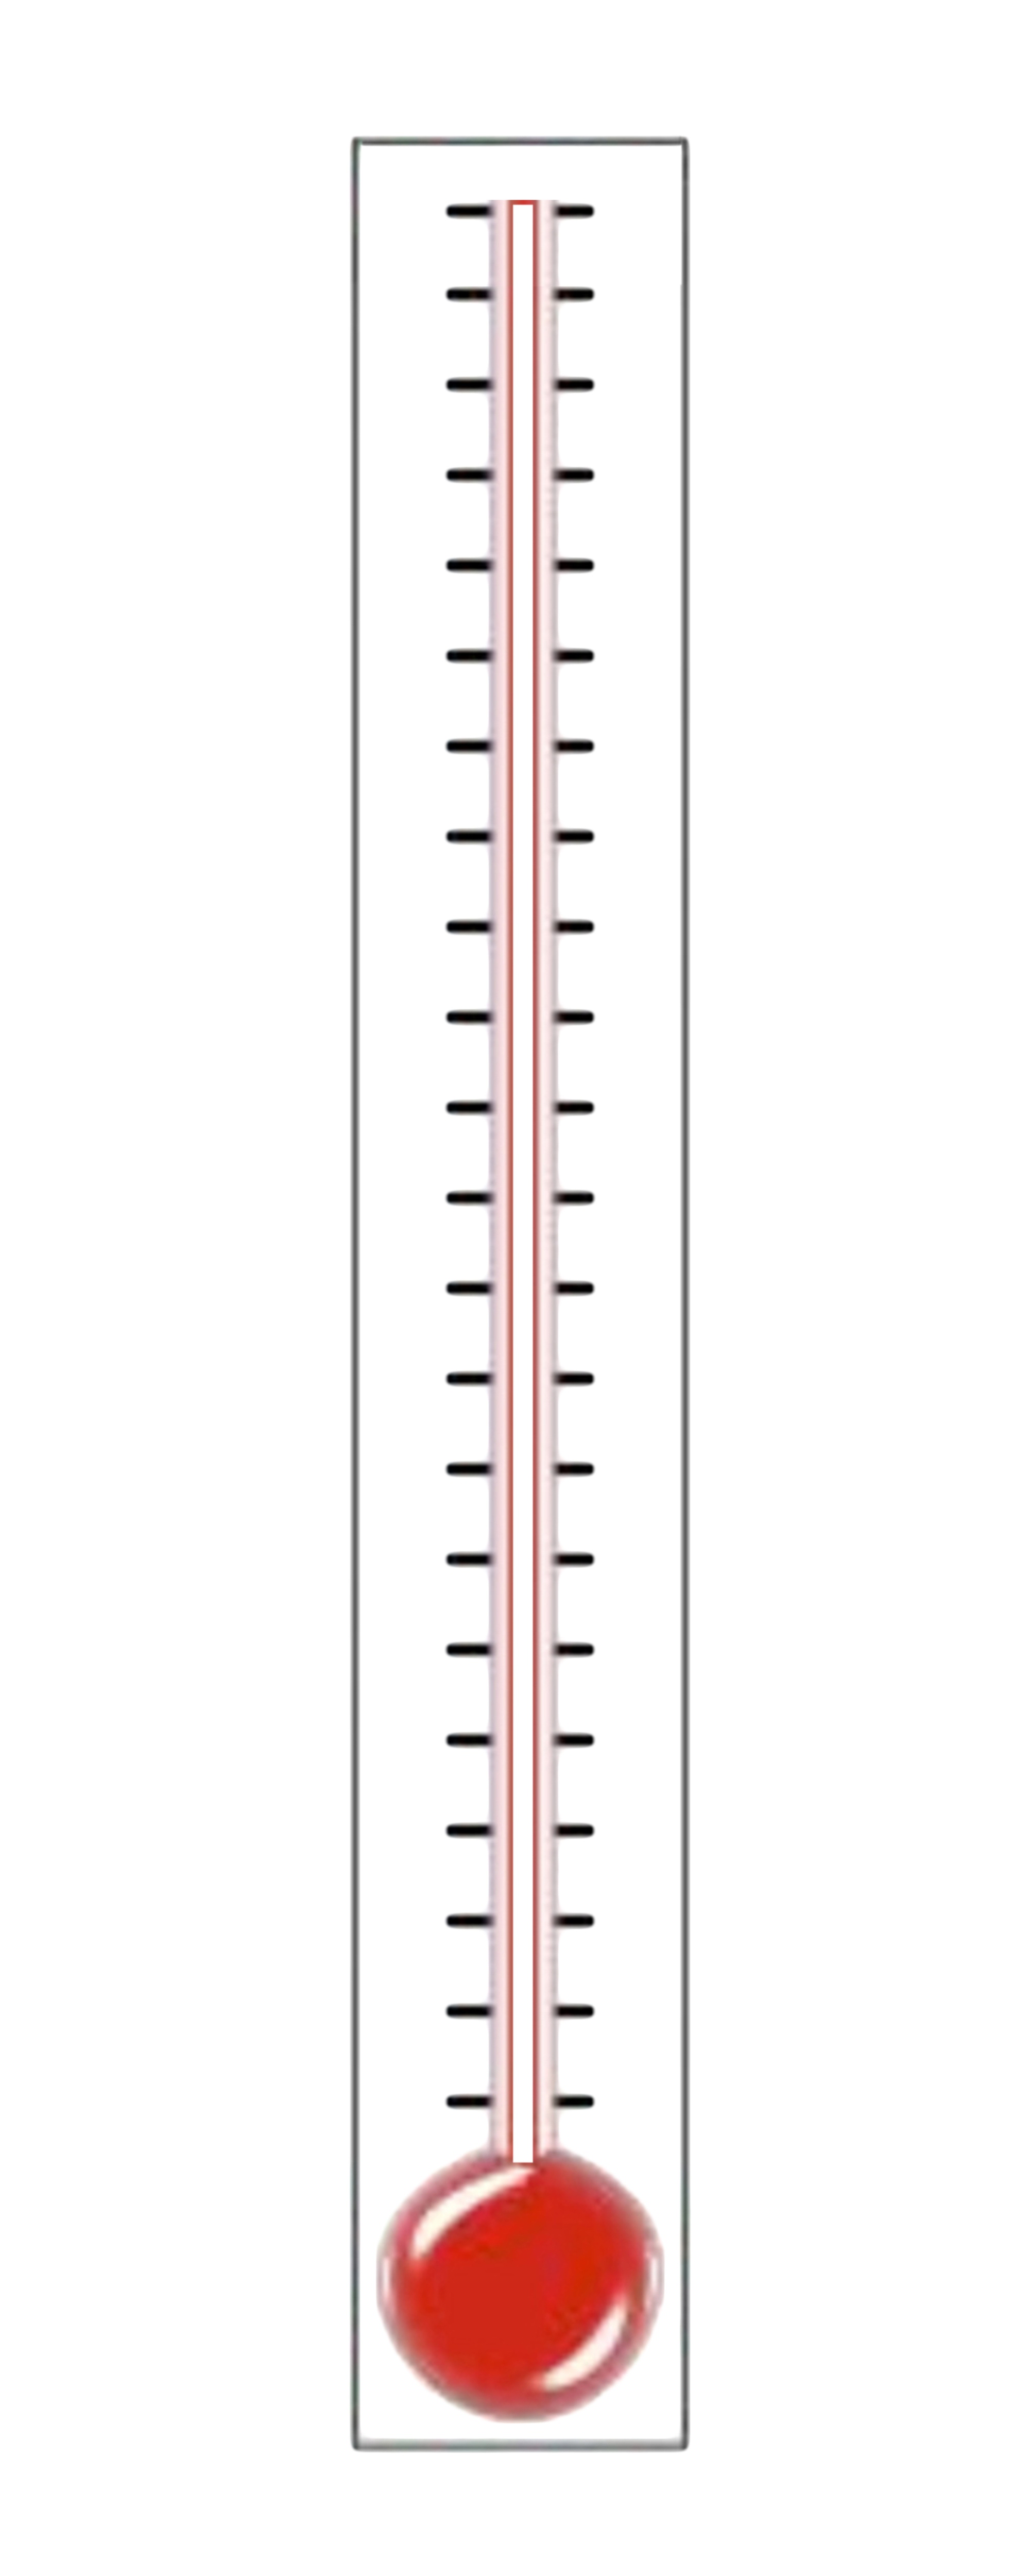 Free Blank Thermometer, Download Free Blank Thermometer png images